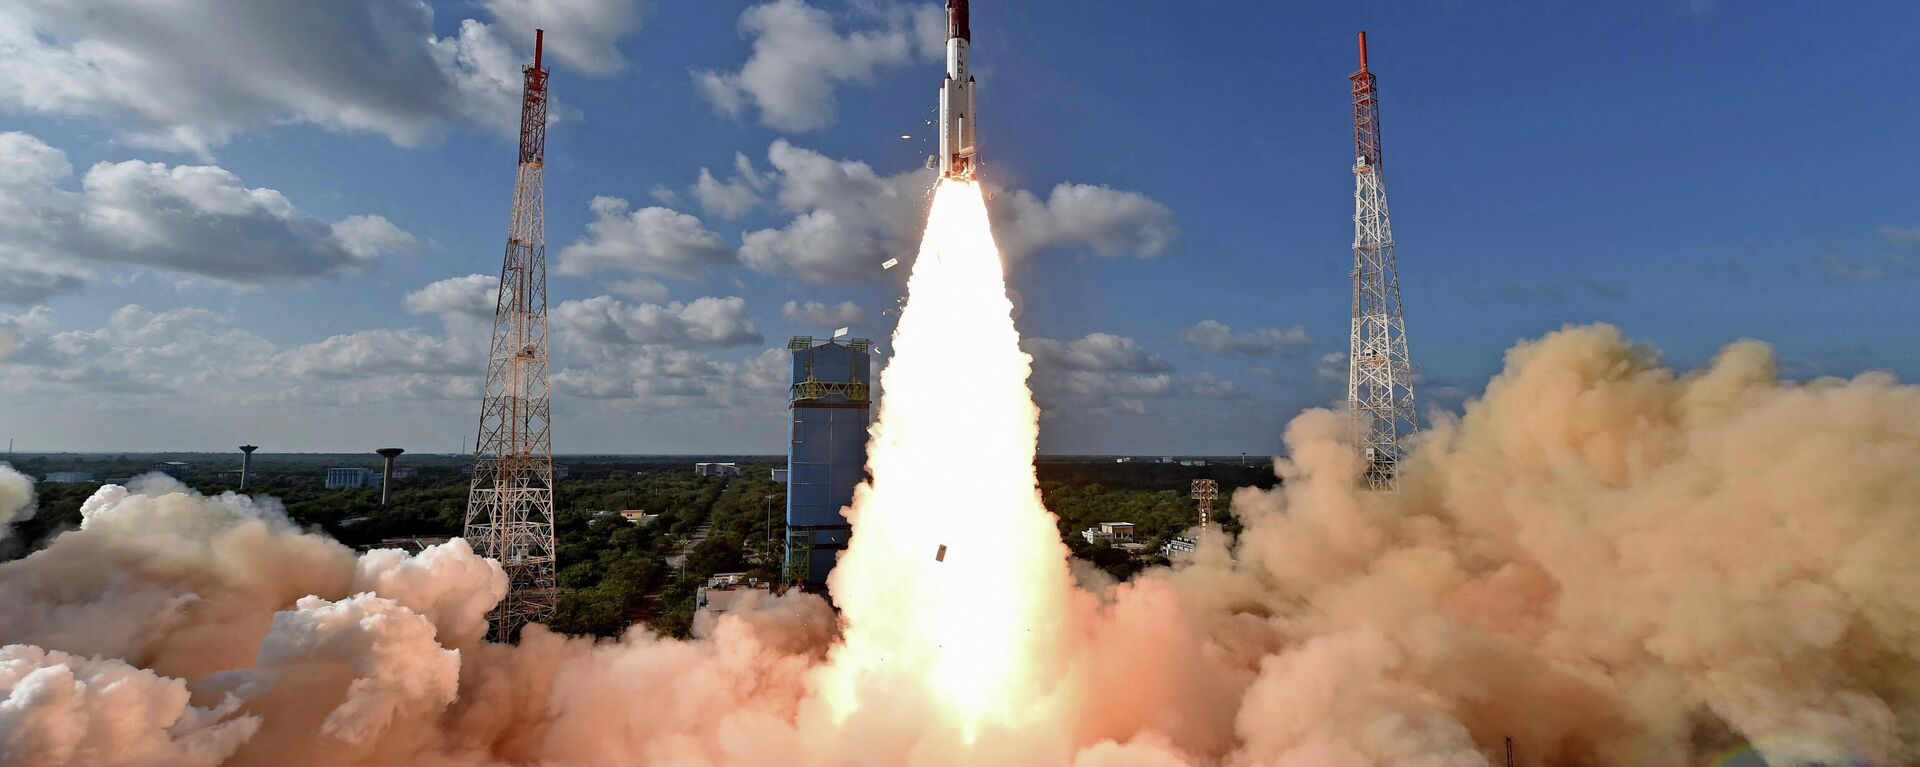 This handout photo provided by the Indian Space Research Organization shows PSLV-C48 lifting off at the Satish Dhawan Space Center in Sriharikota, India, Wednesday, Dec. 11, 2019.
India’s Polar Satellite Launch Vehicle successfully launched RISAT-2BR1 along with nine commercial satellites, according to a press release. RISAT-2BR1 is a radar imaging earth observation satellite weighing about 628 kg, it said - Sputnik International, 1920, 23.10.2022